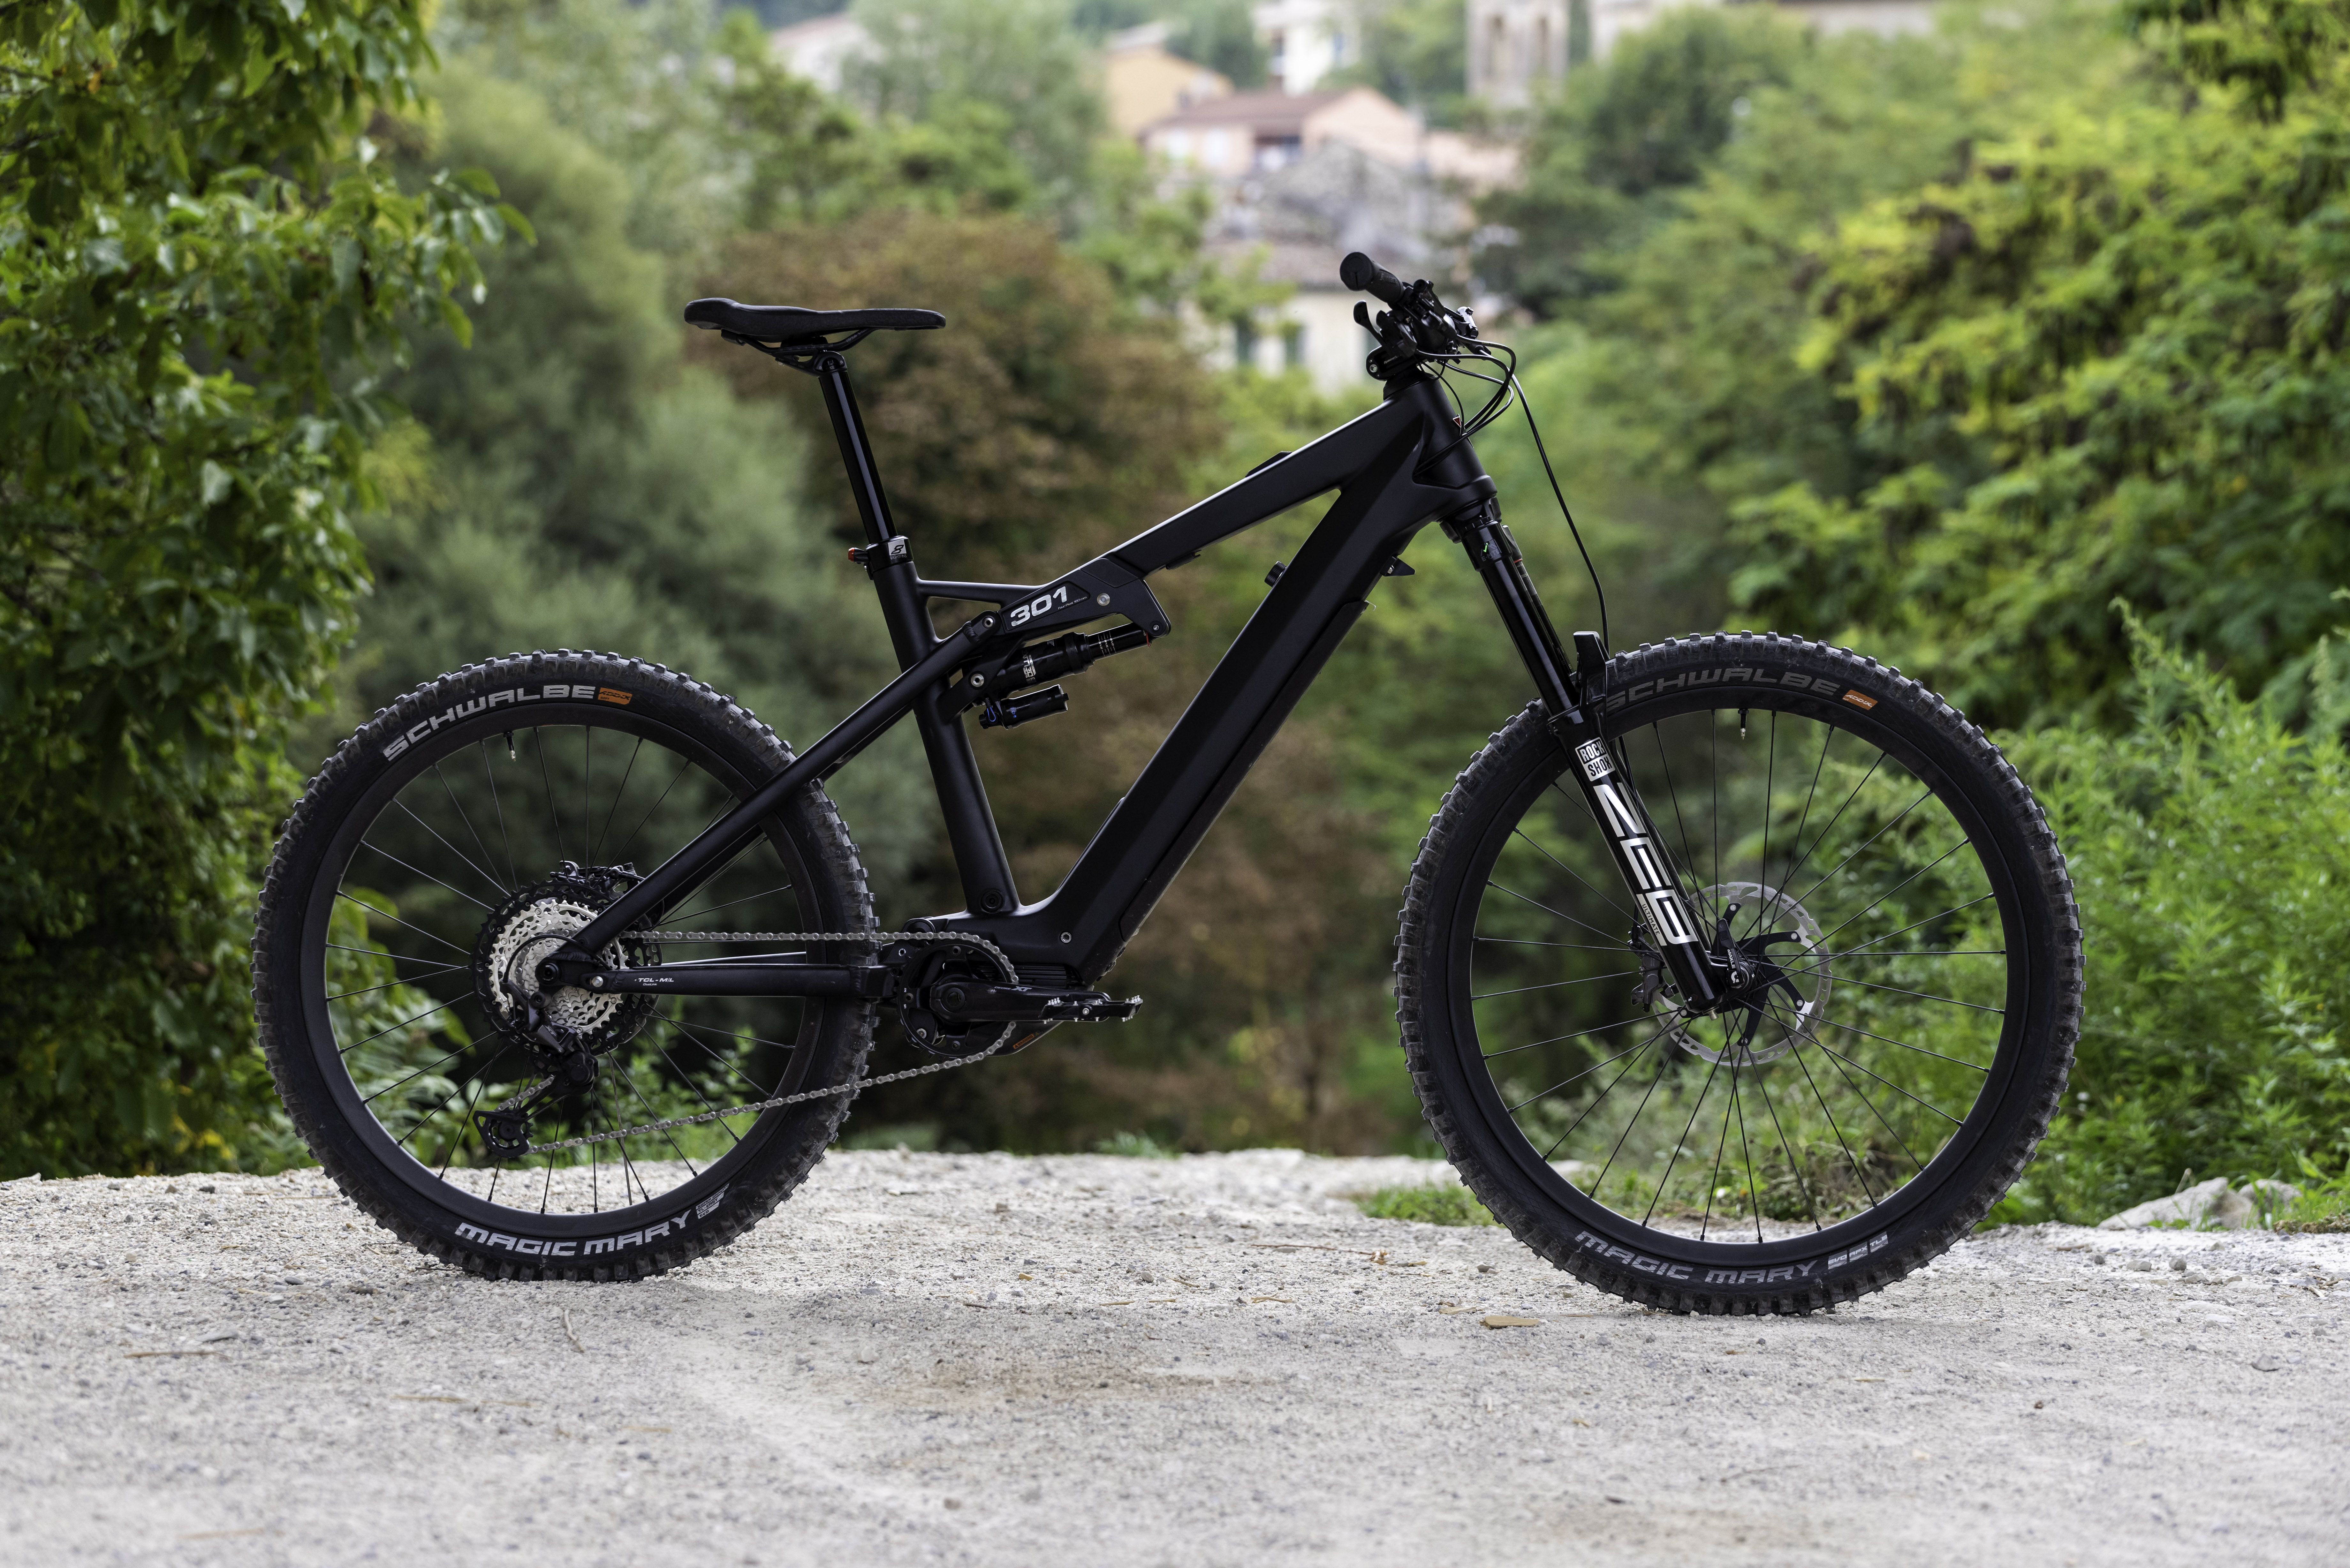 Liteville’s K.I.S. equipped 301 CE e-bike isn’t sold in the USA.